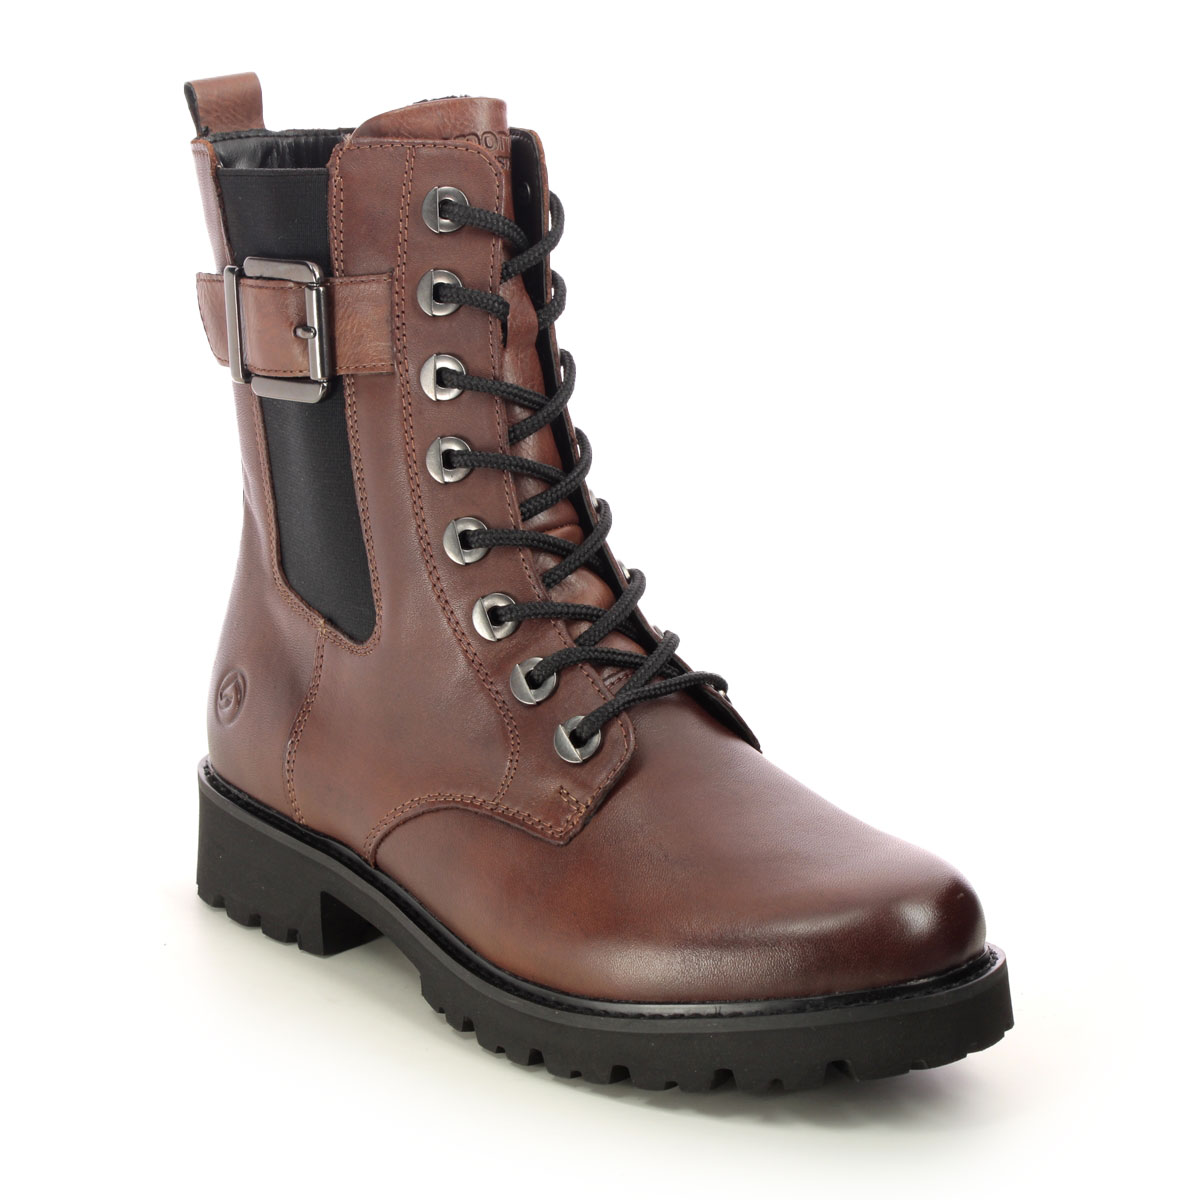 Remonte Doclachel Elle Brown Leather Womens Biker Boots D8668-22 In Size 39 In Plain Brown Leather